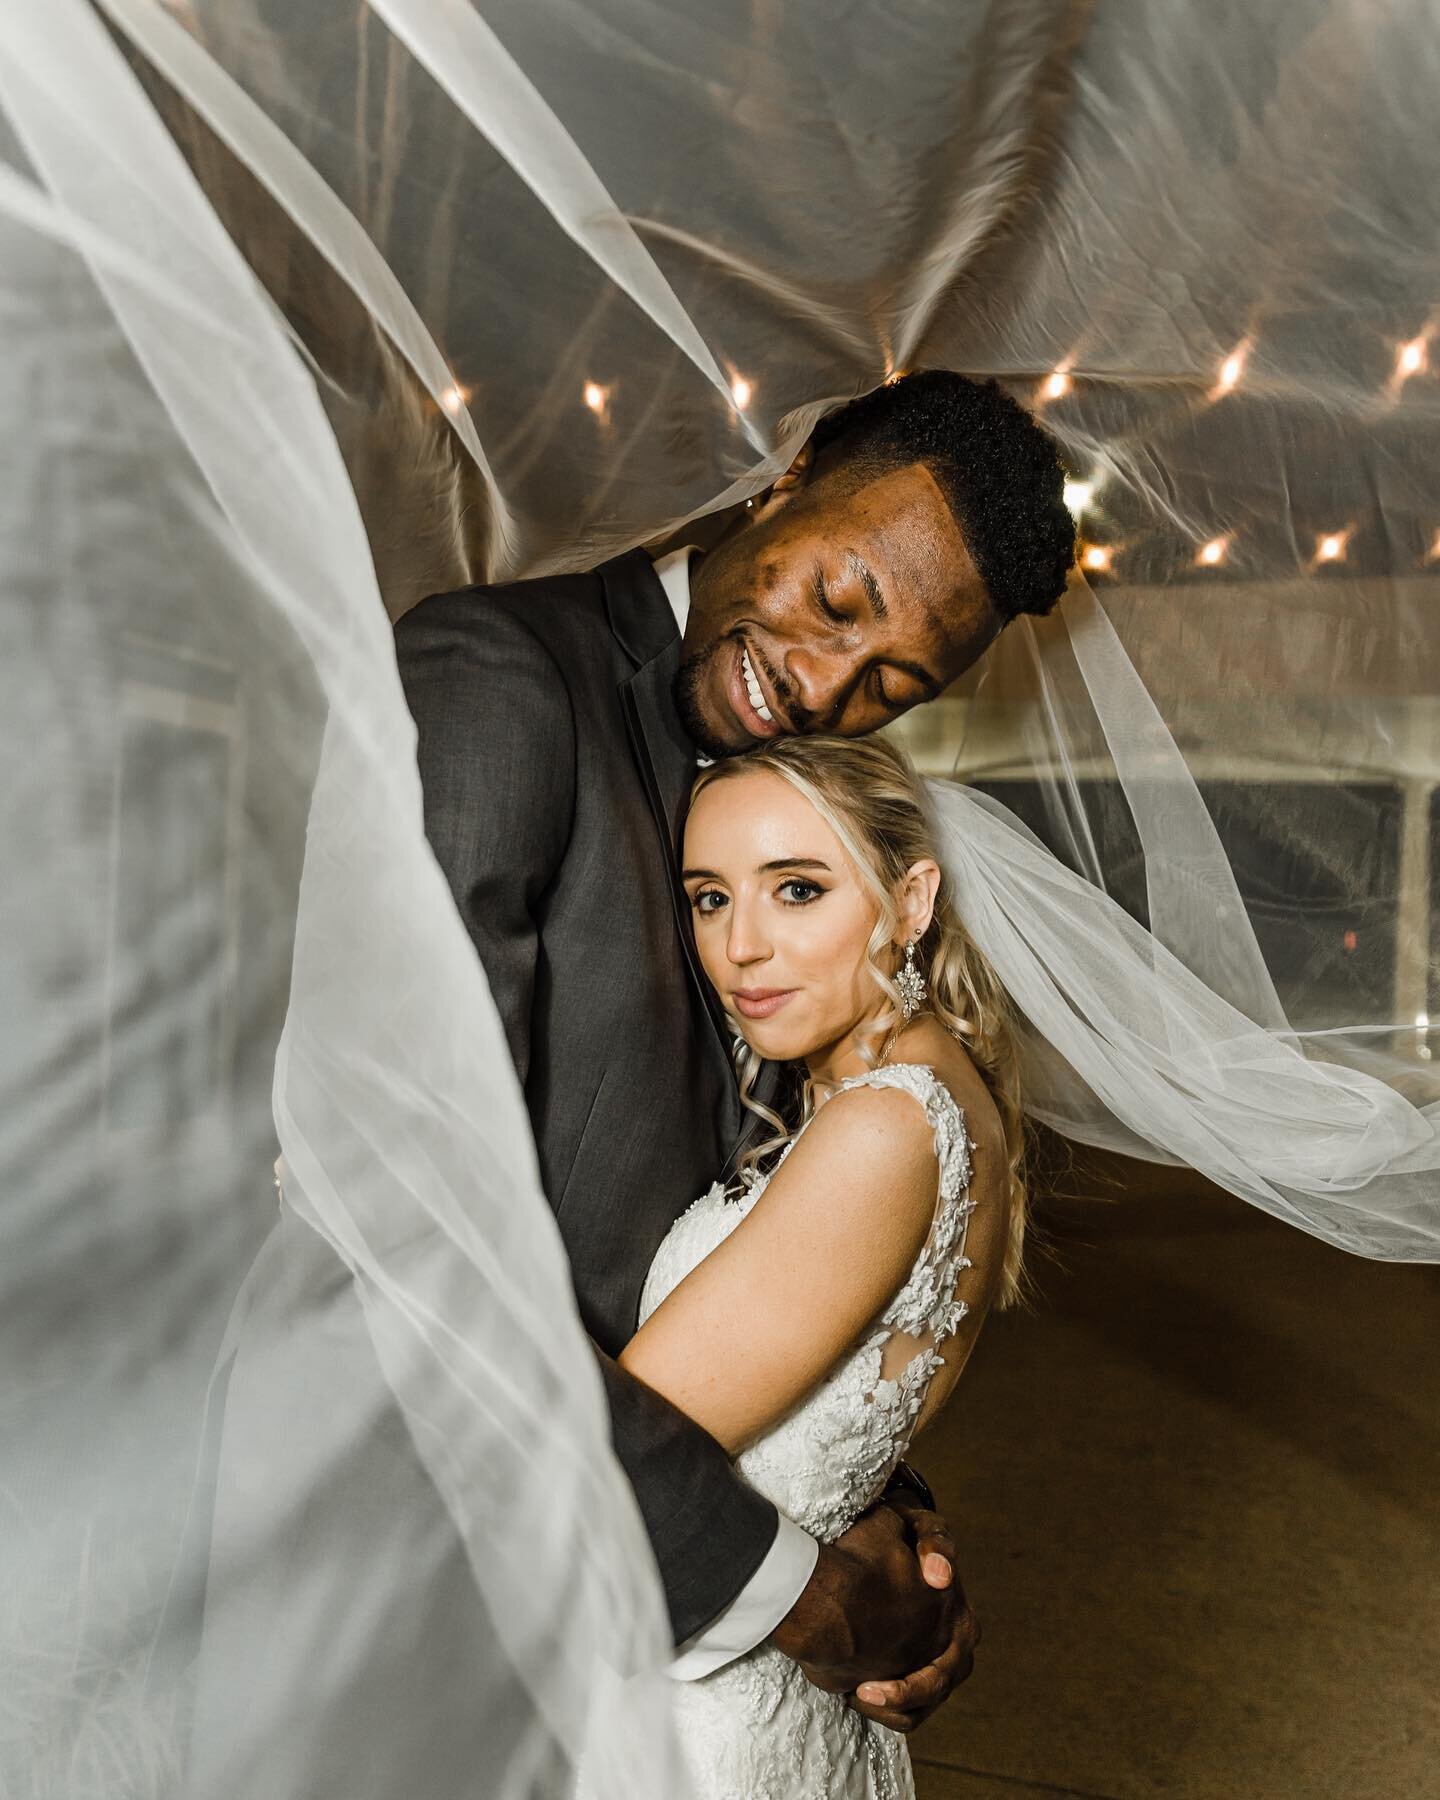 Rad couple + swooshy veil + flash at night = glamour shots 📸 

The week of MLK day has me tender hearted and fired up about speaking up and daring to start conversations about racial discrimination. 

It&rsquo;s so unfortunate to admit that racism s